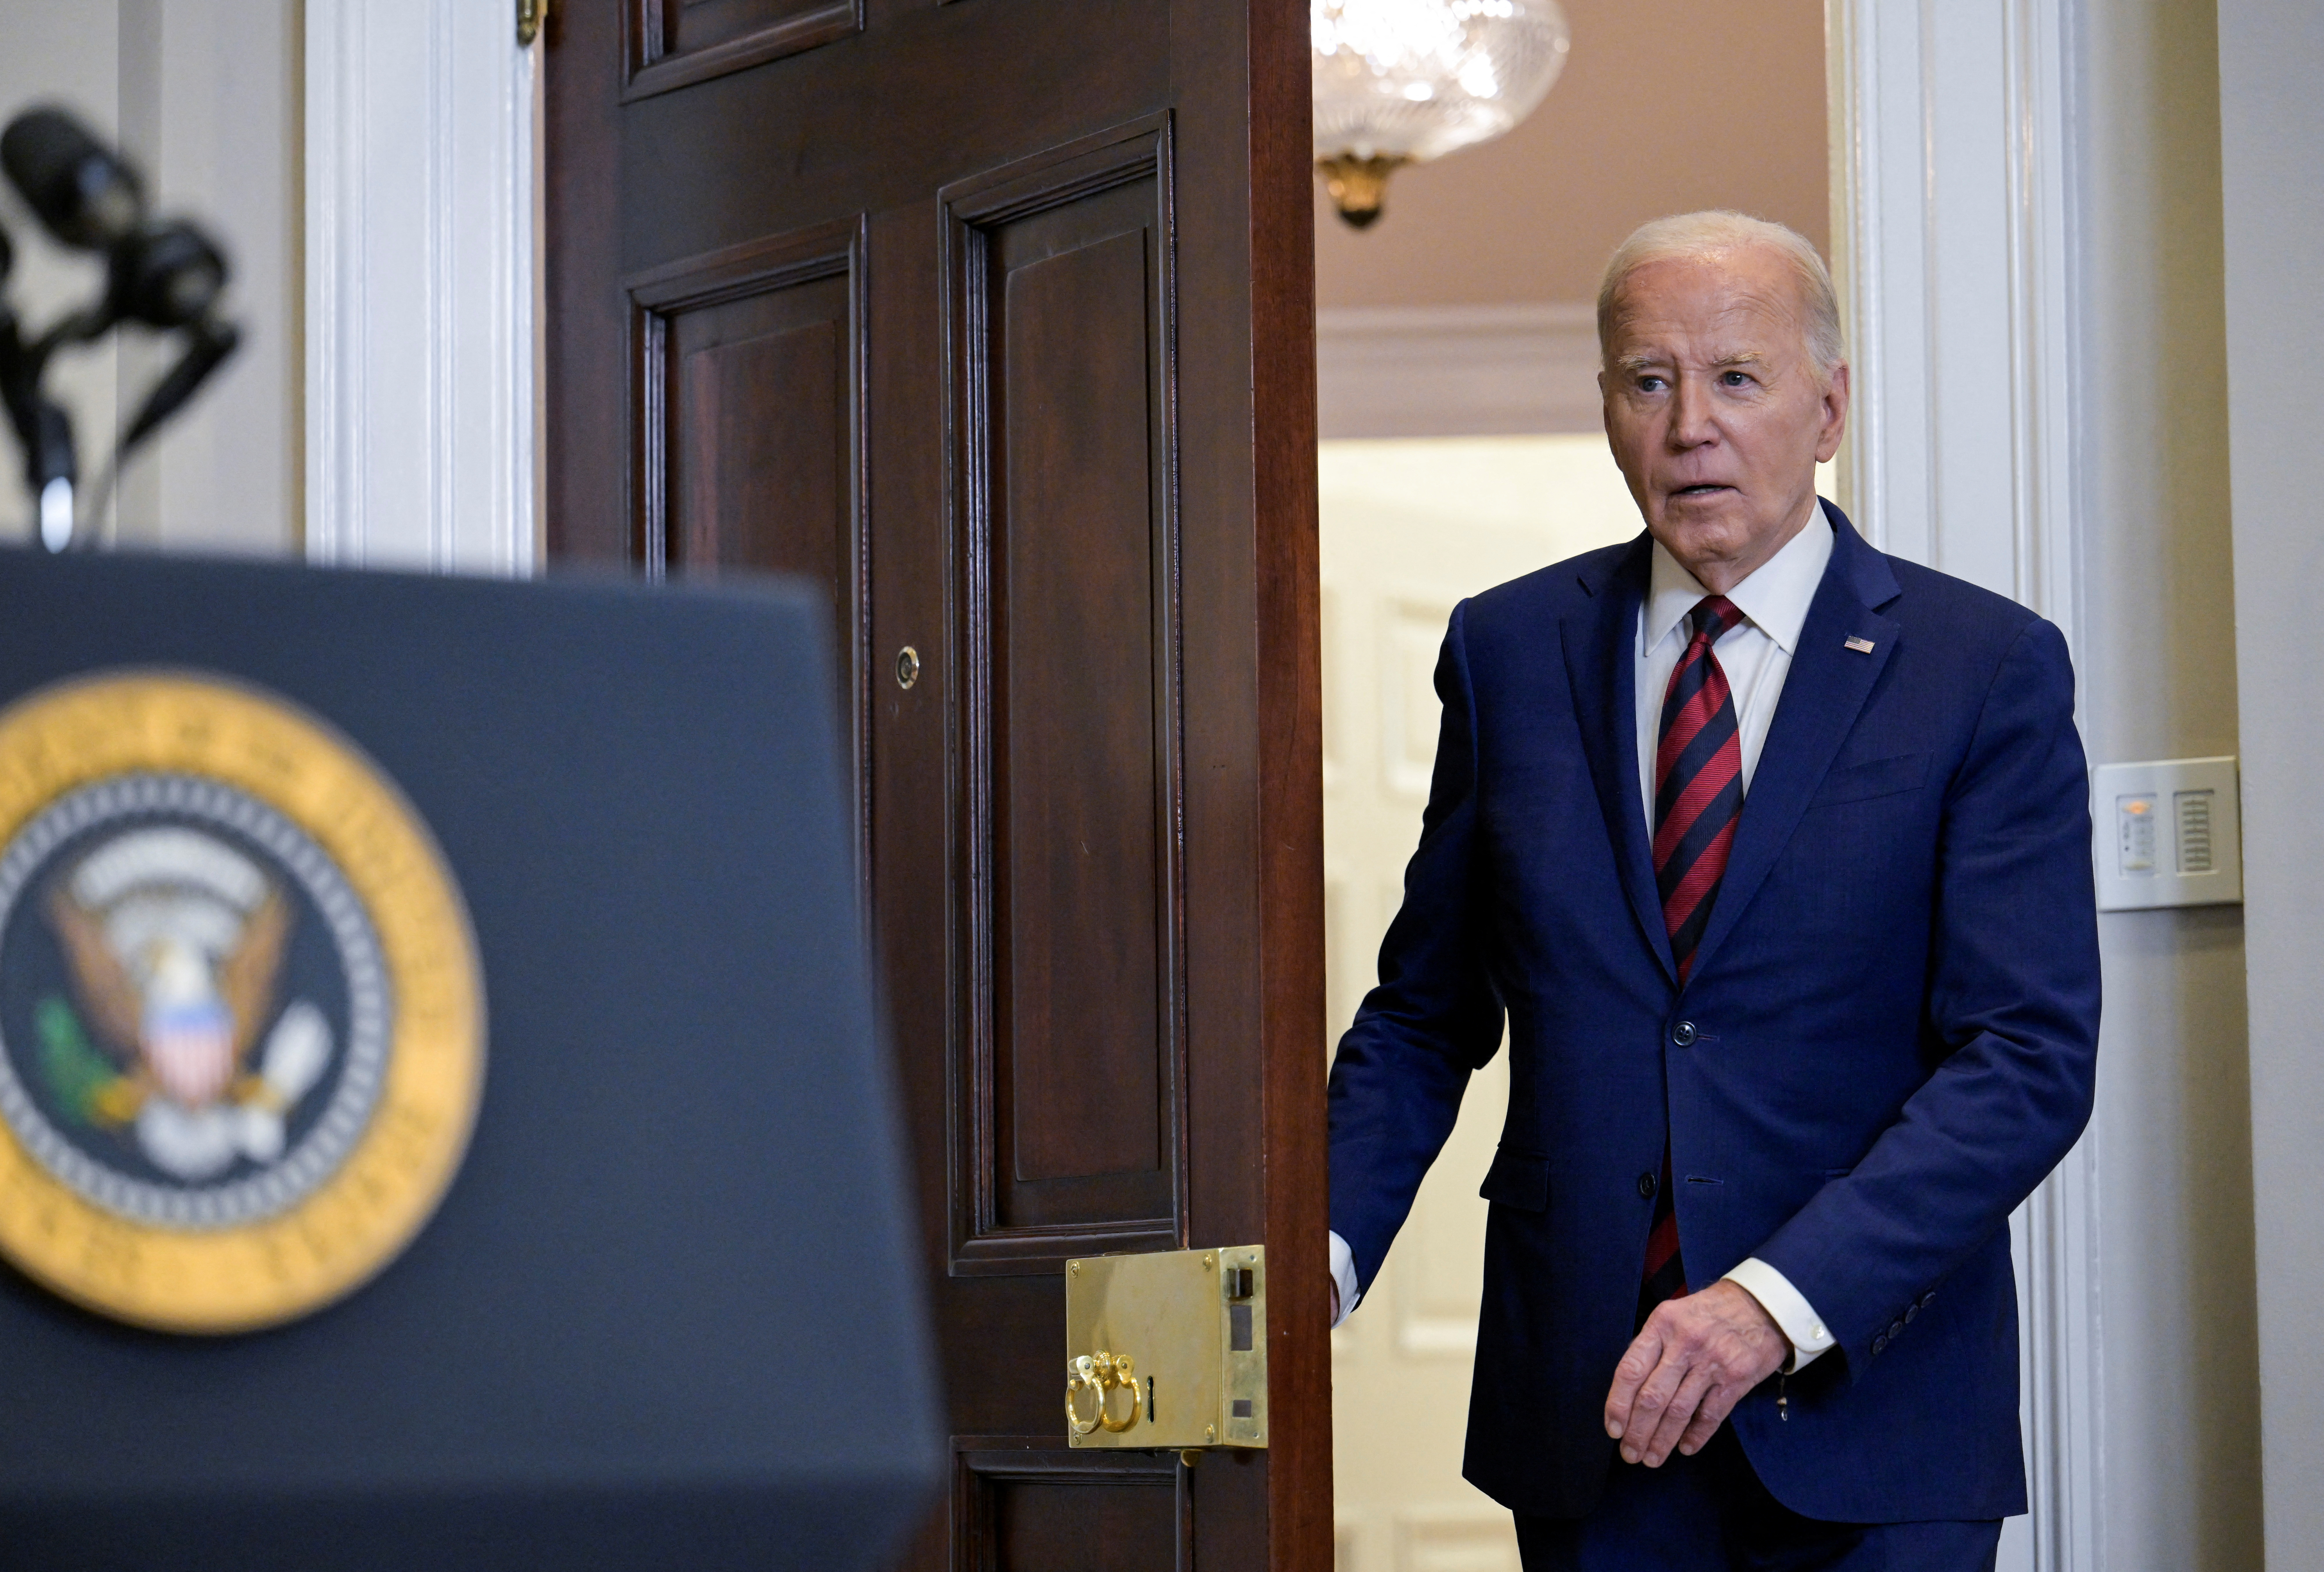 U.S. President Joe Biden delivers remarks about Key Bridge collapse before departing the White House in Washington